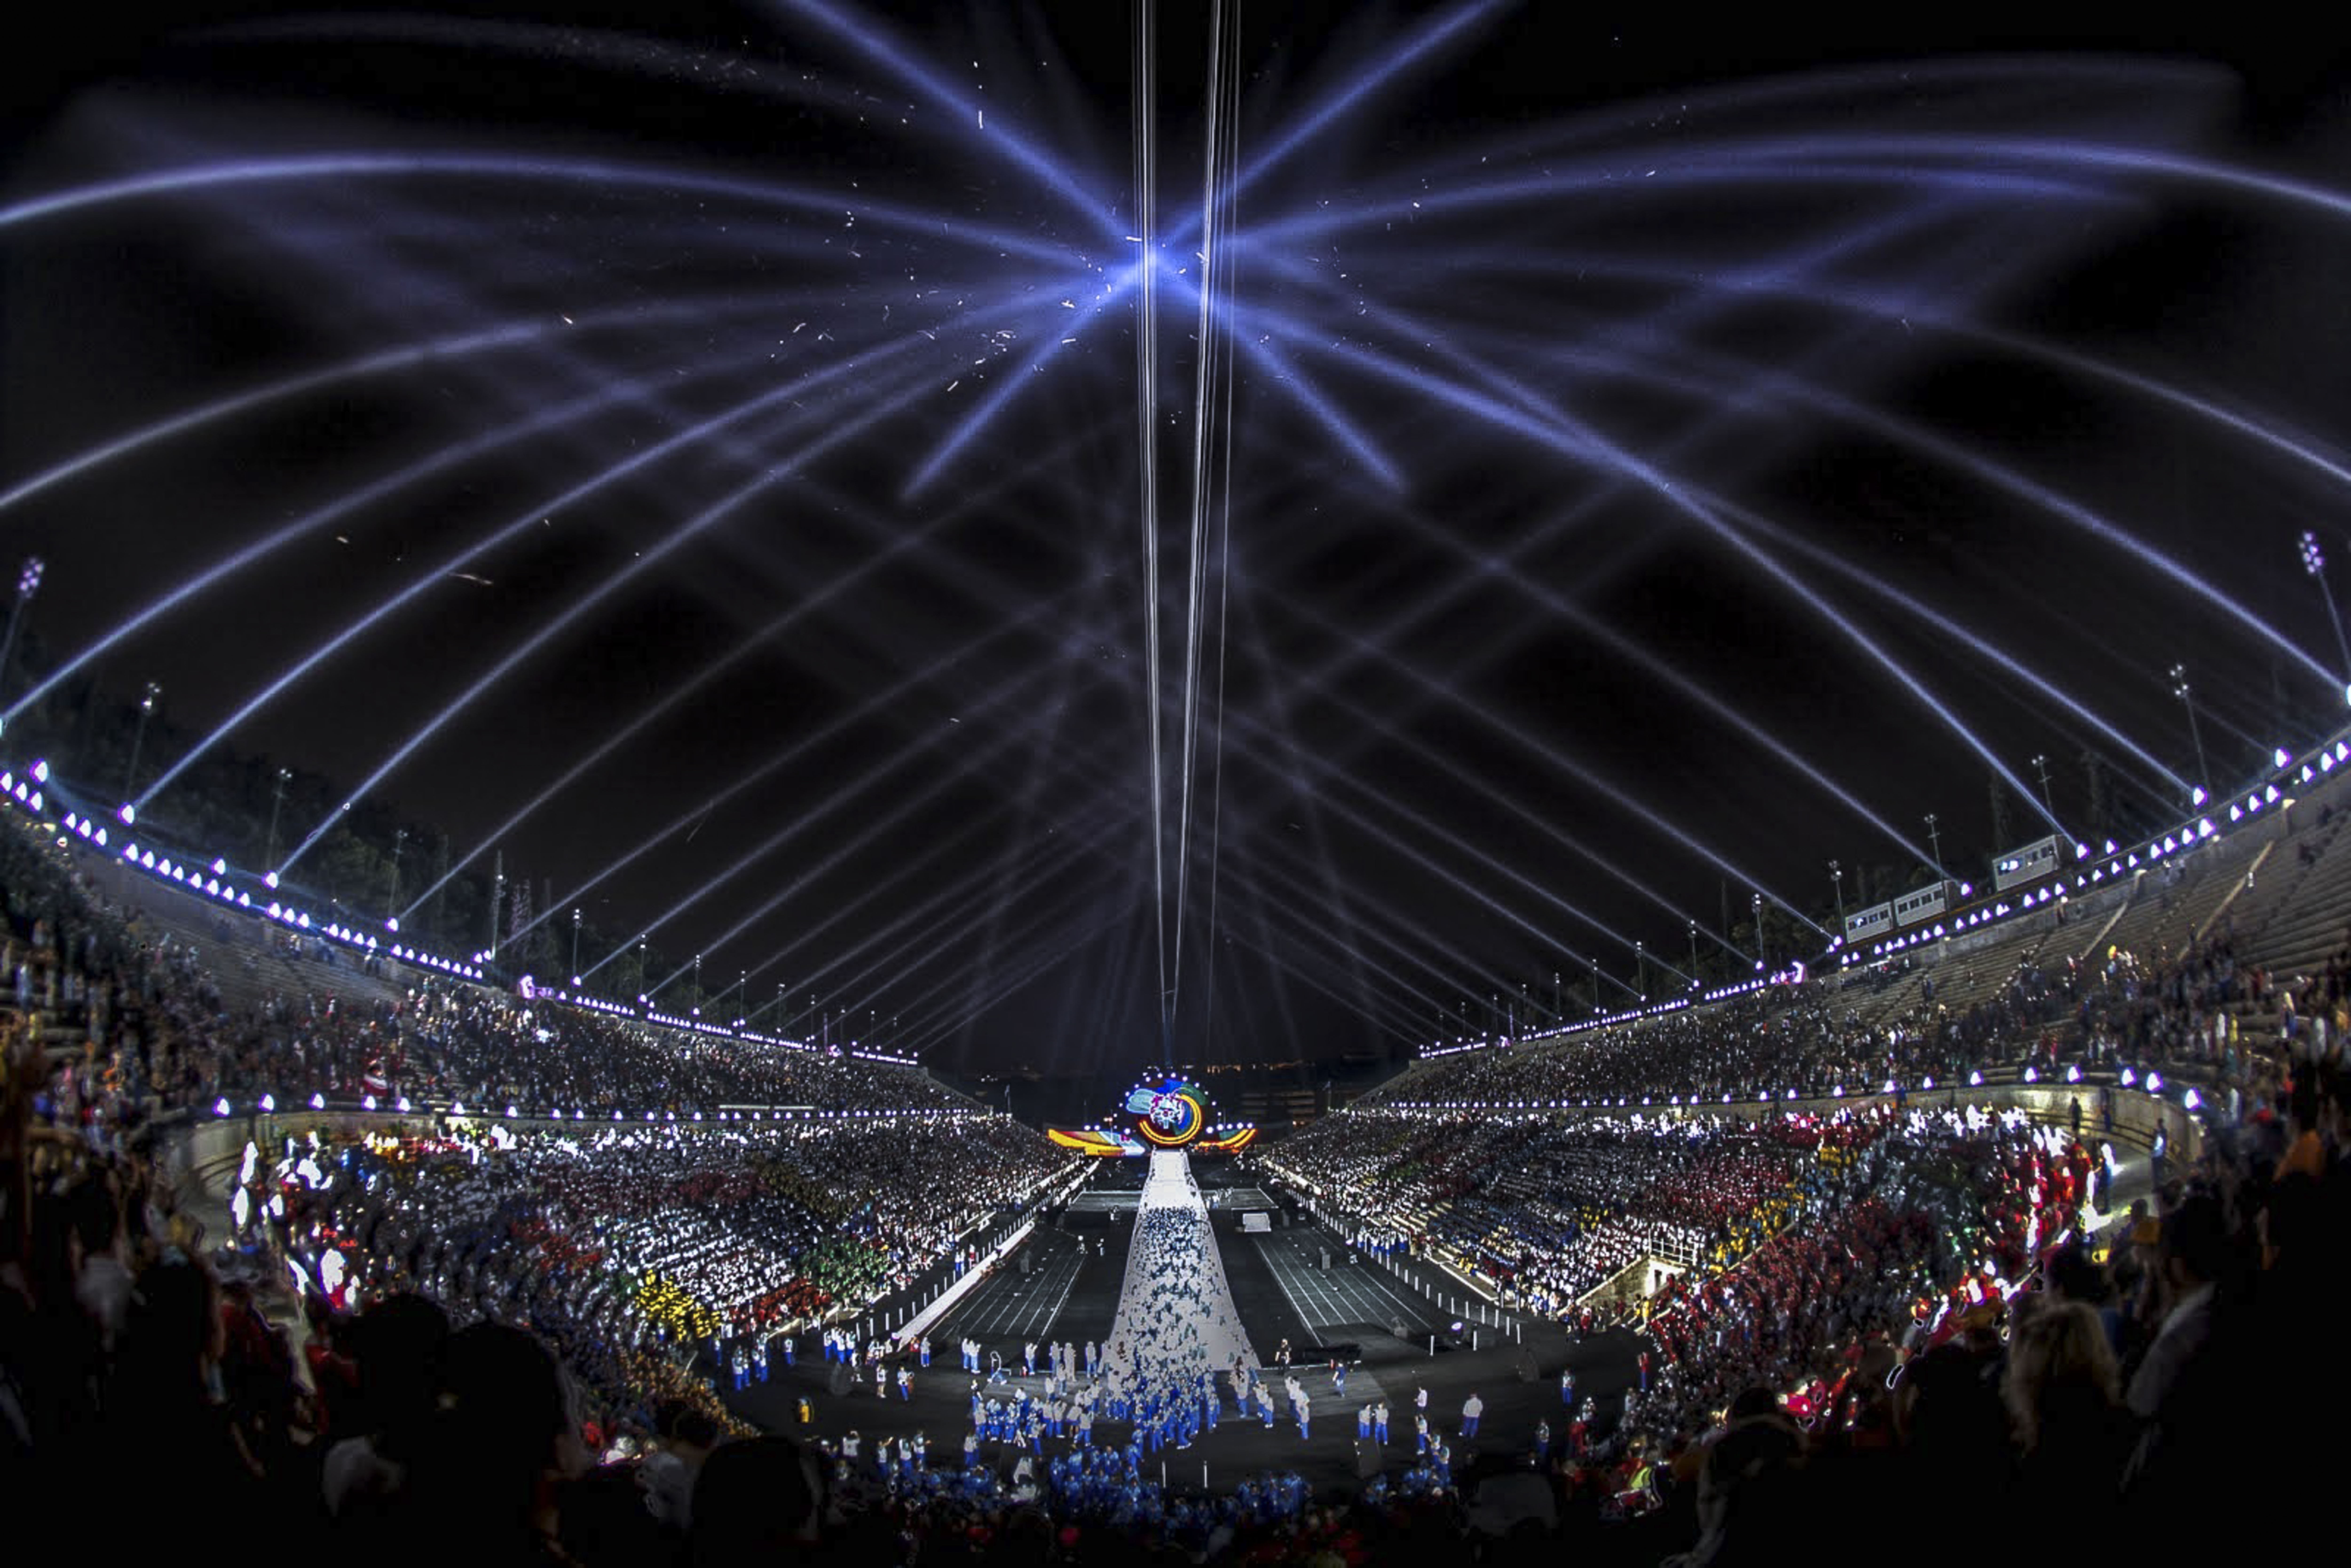 The 2011 Special Olympics World Summer Games Grand Opening  25 June in Athens, Greece, in the historic Panathenaikon Stadium